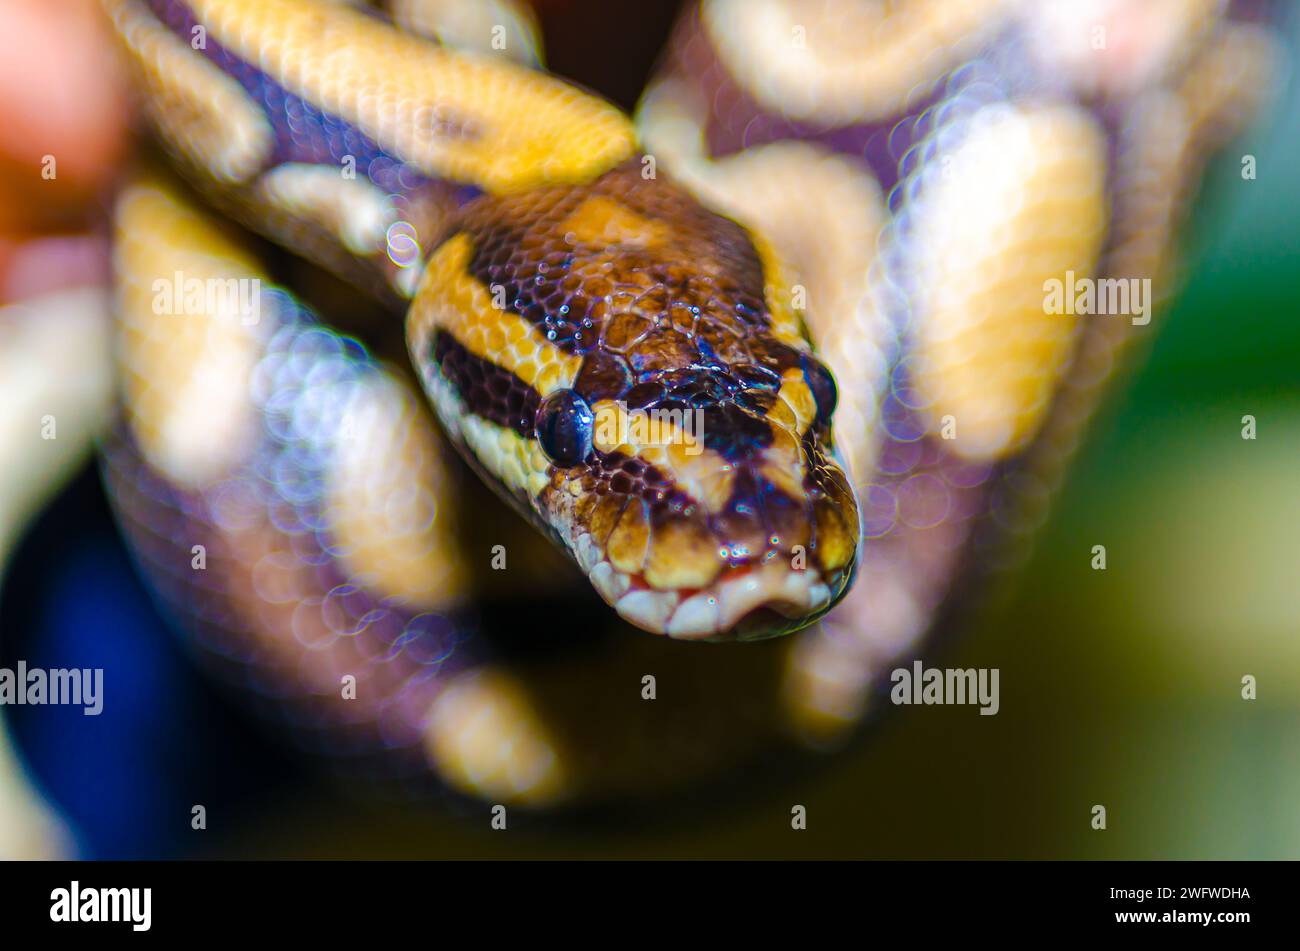 Close up photo of a colorful snake Stock Photo